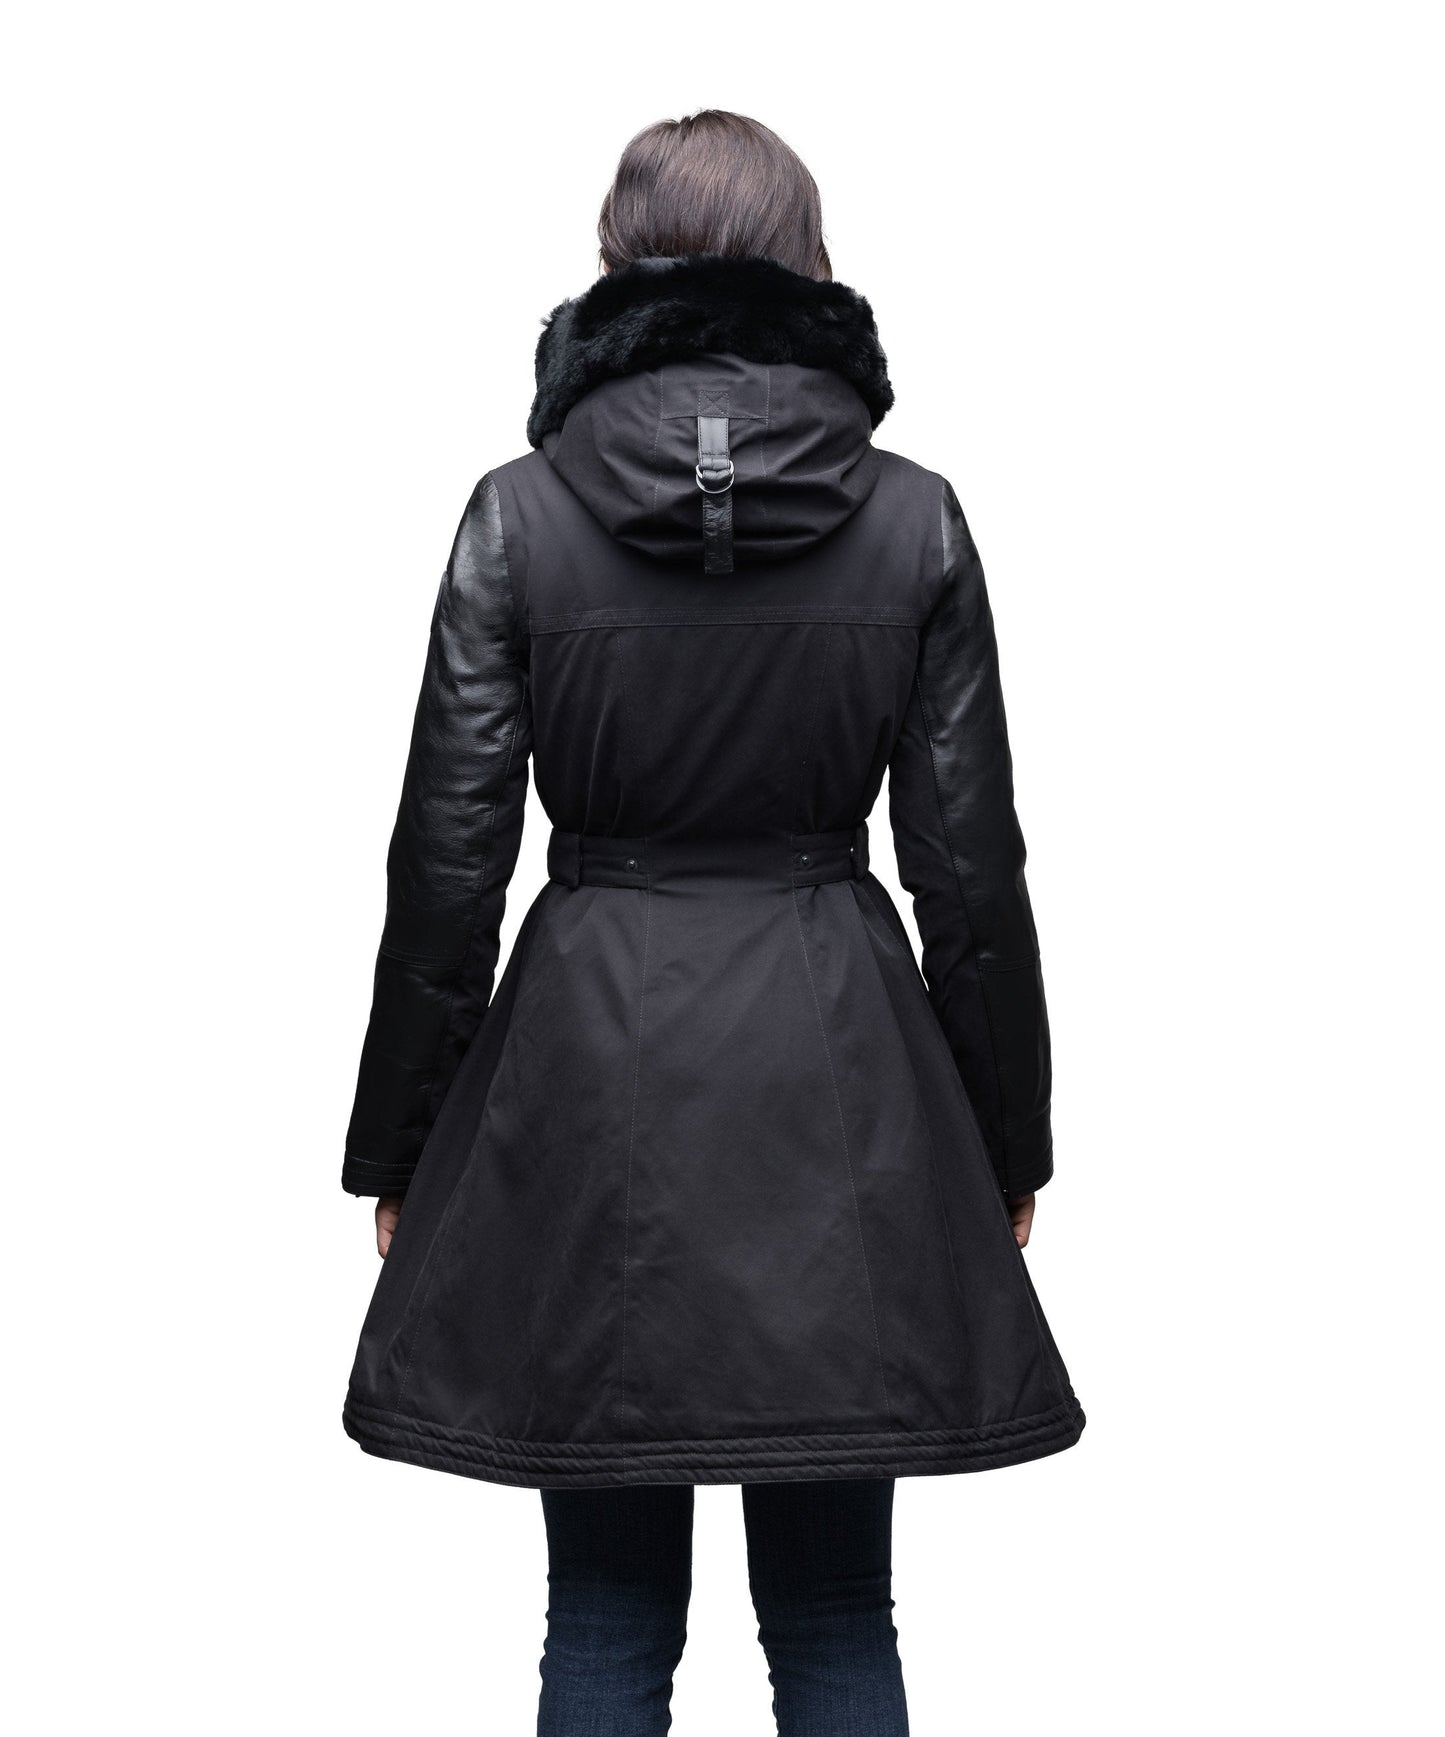 Women's down filled overcoat with double breasted closure and removable down filled lined in Black